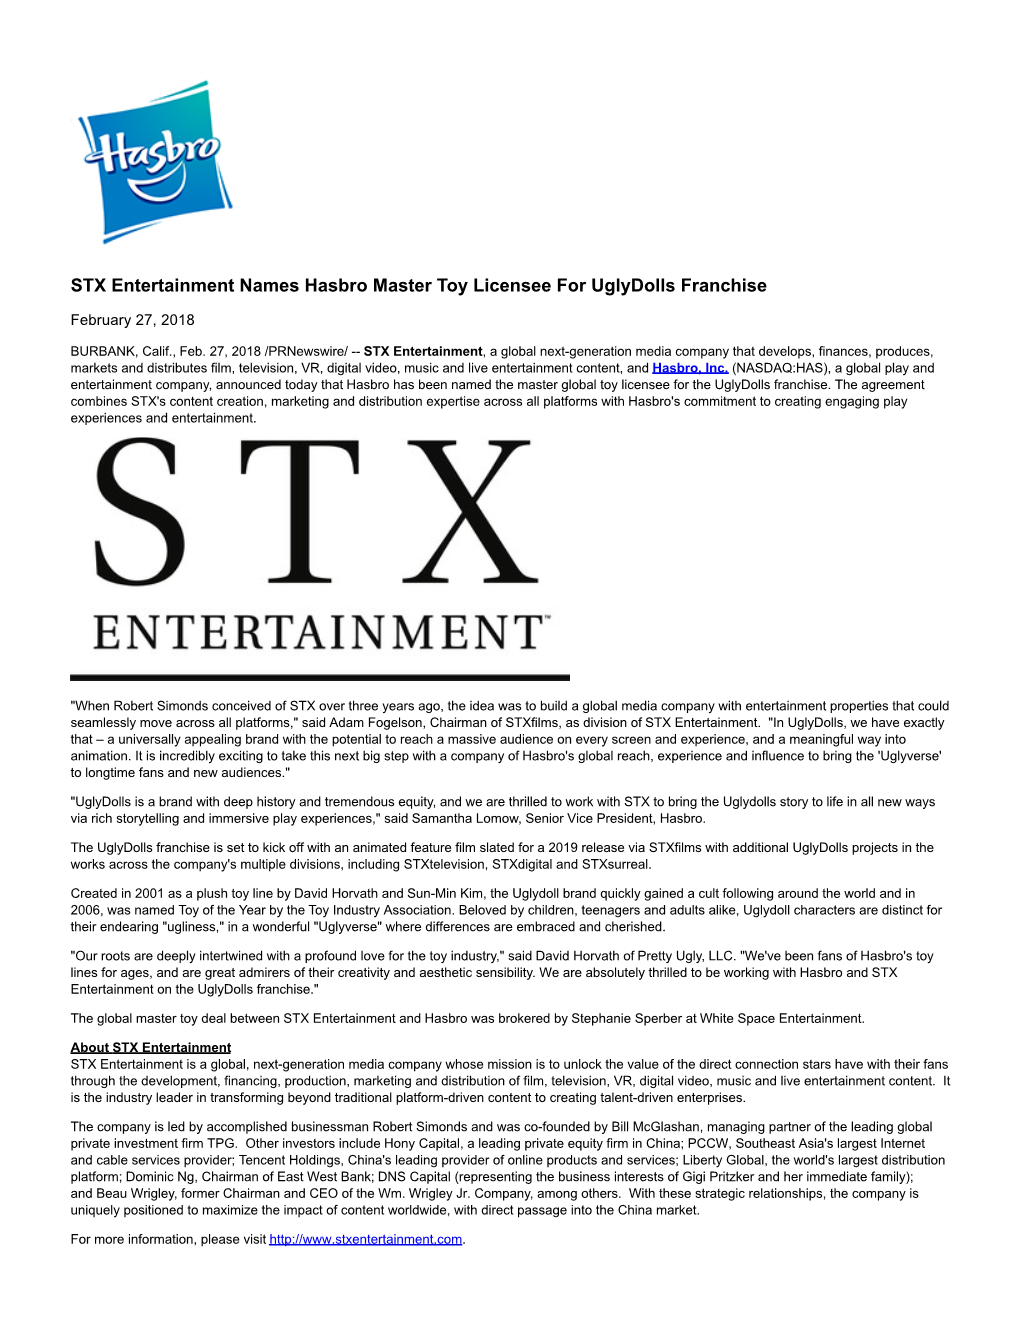 STX Entertainment Names Hasbro Master Toy Licensee for Uglydolls Franchise